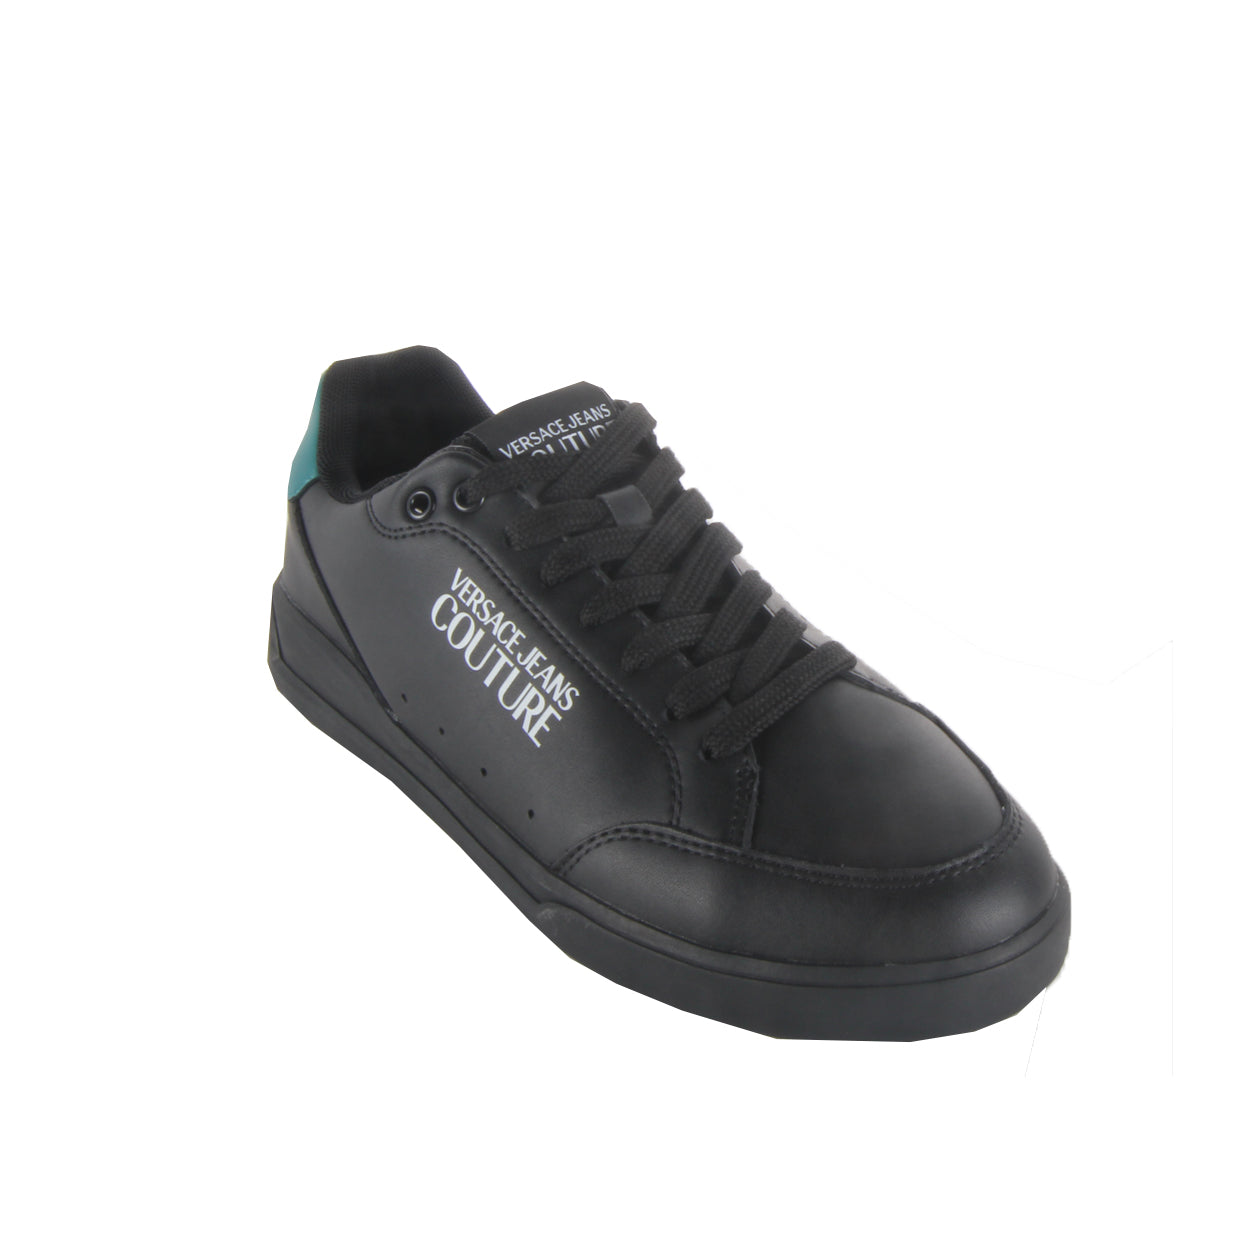 Versace Jeans Couture Black Trainers